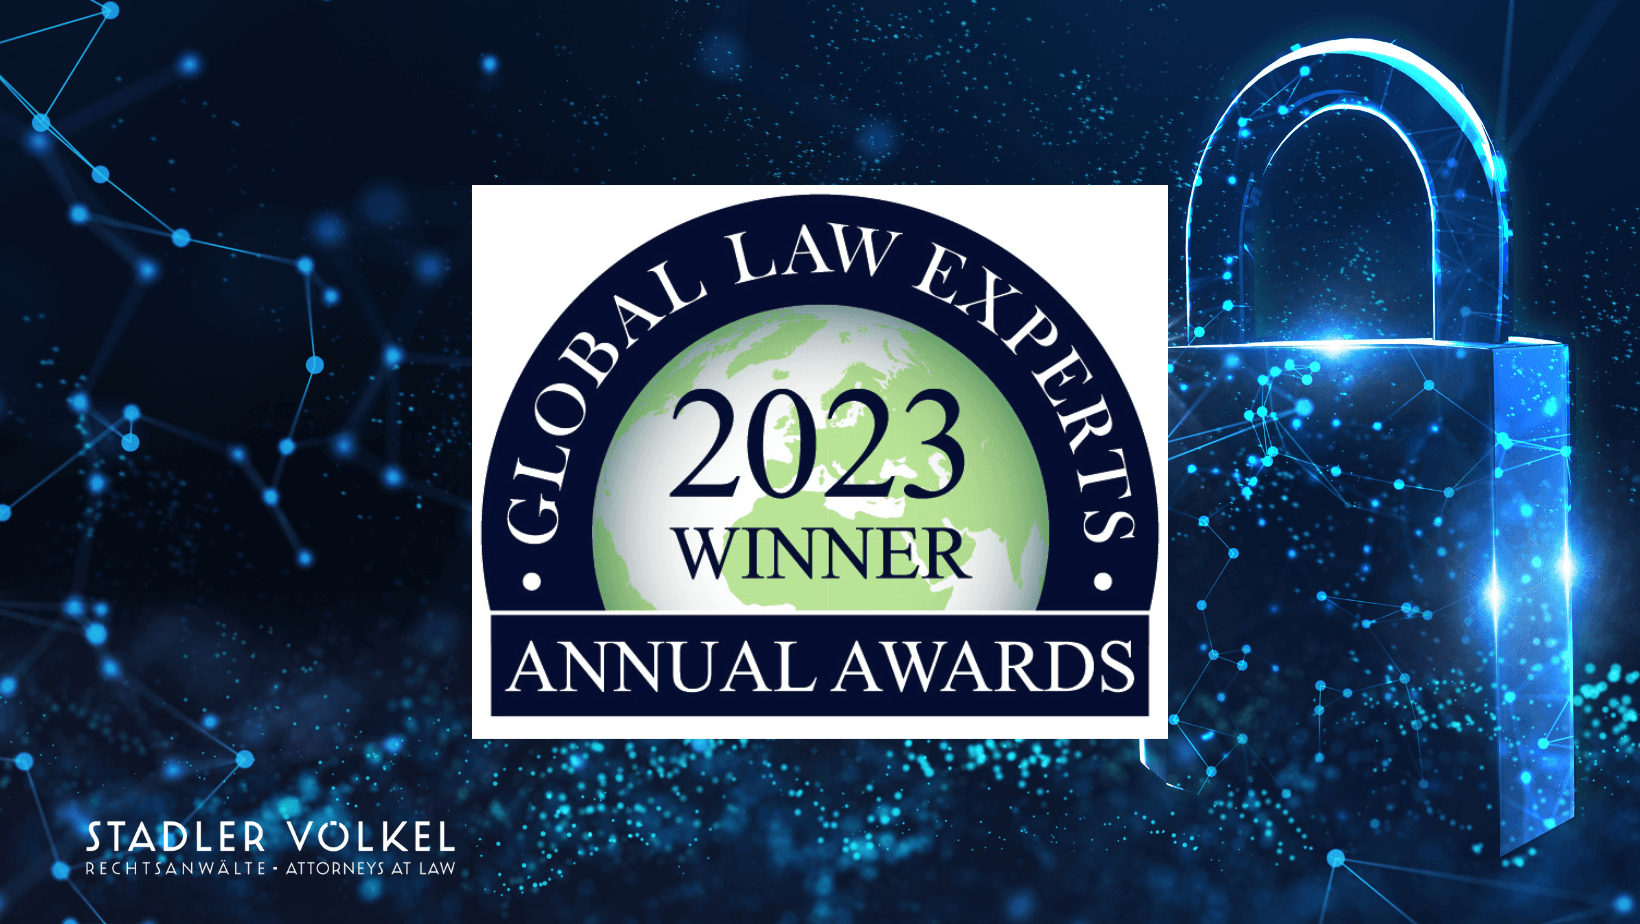 Global Law Experts – 2023 – Arthur Stadler listed as leading "Data Protection Law Expert"